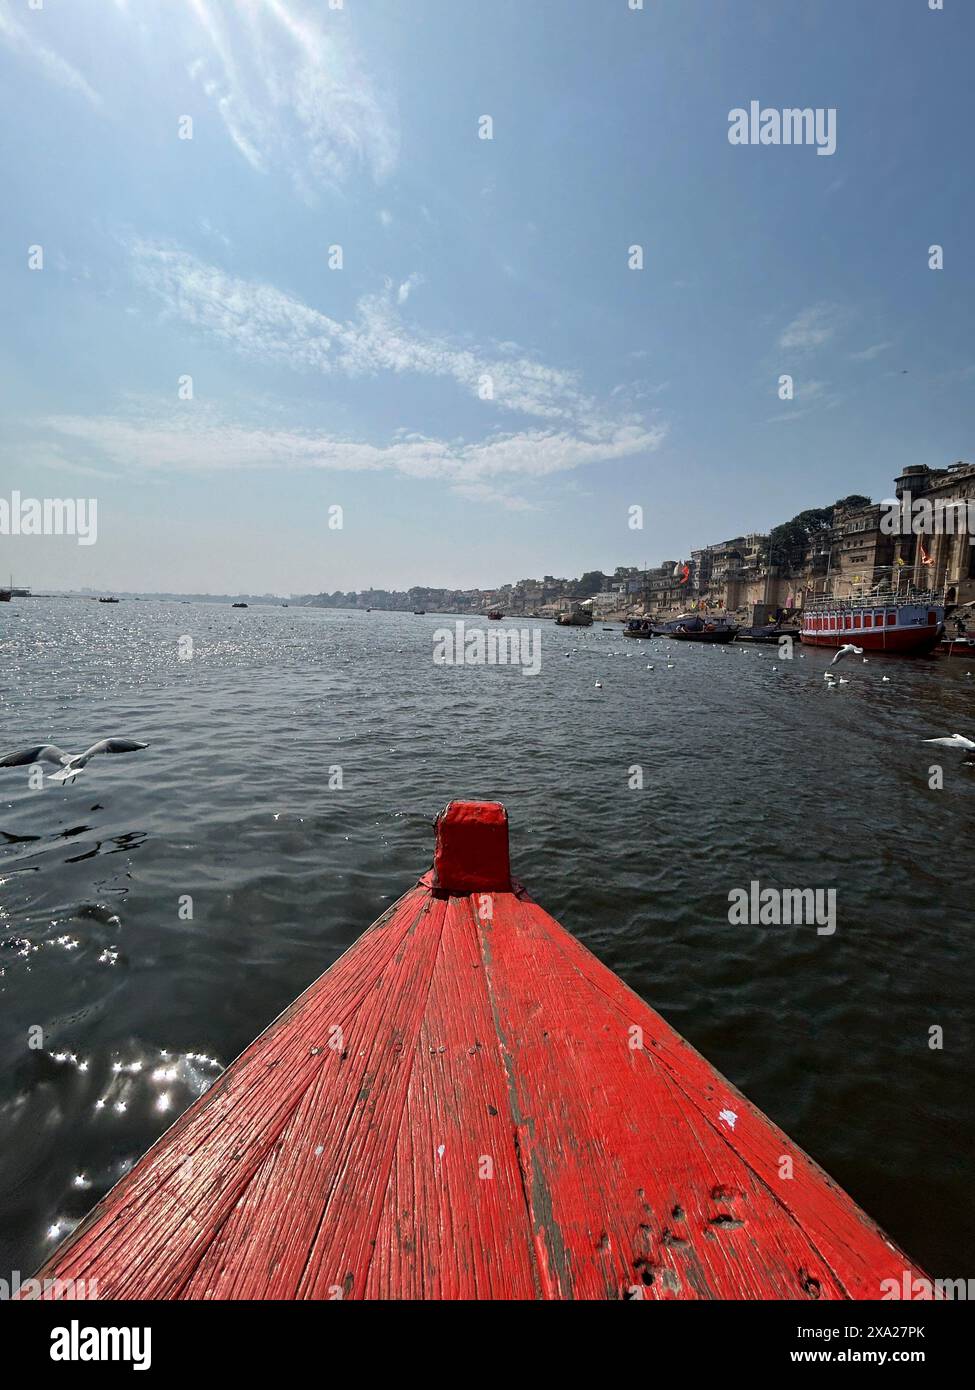 A red boat floating on calm waters Stock Photo